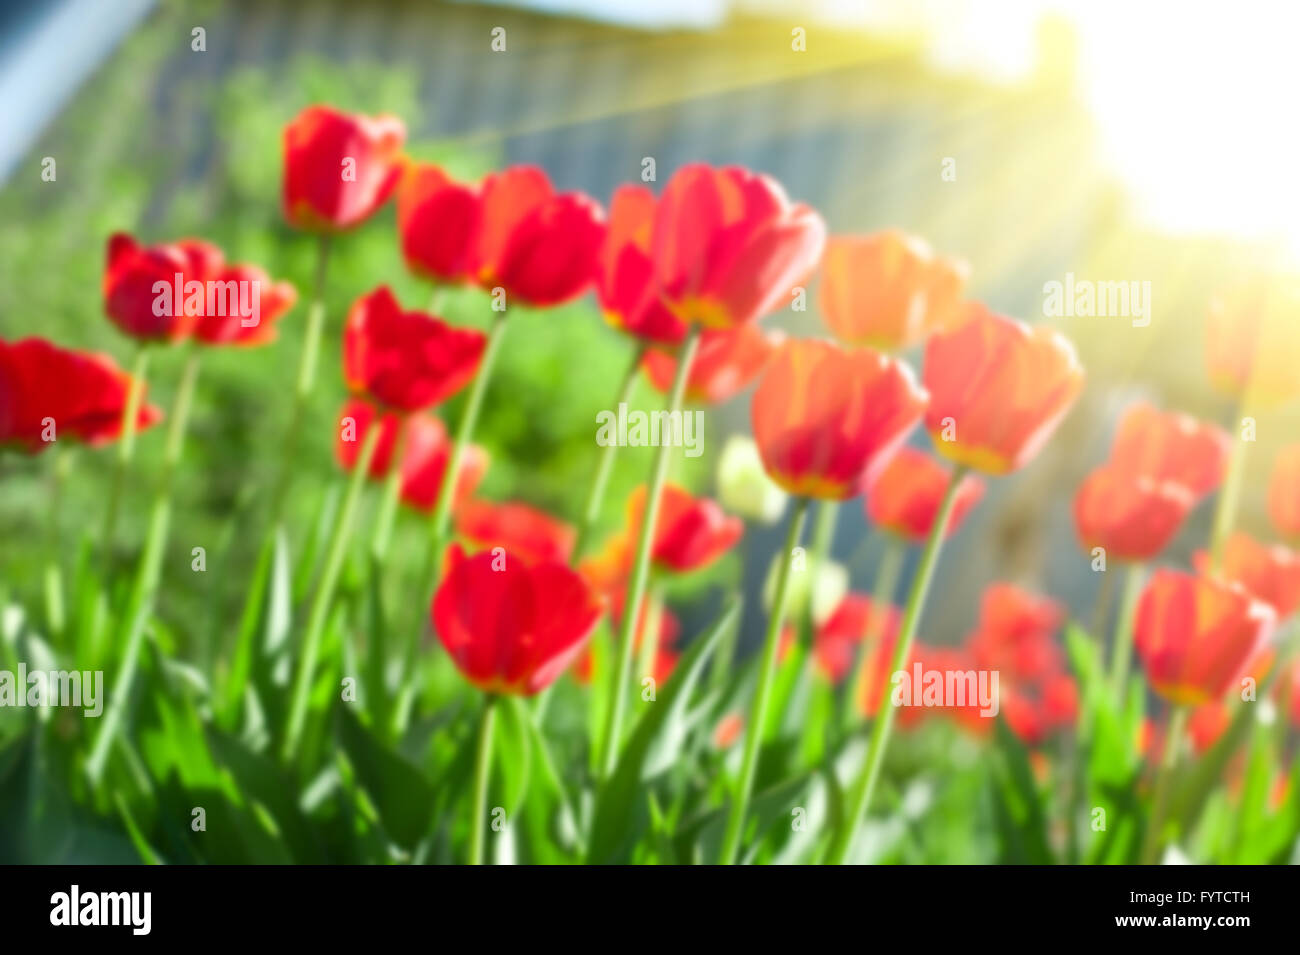 Blurred background of red colored tulips Stock Photo